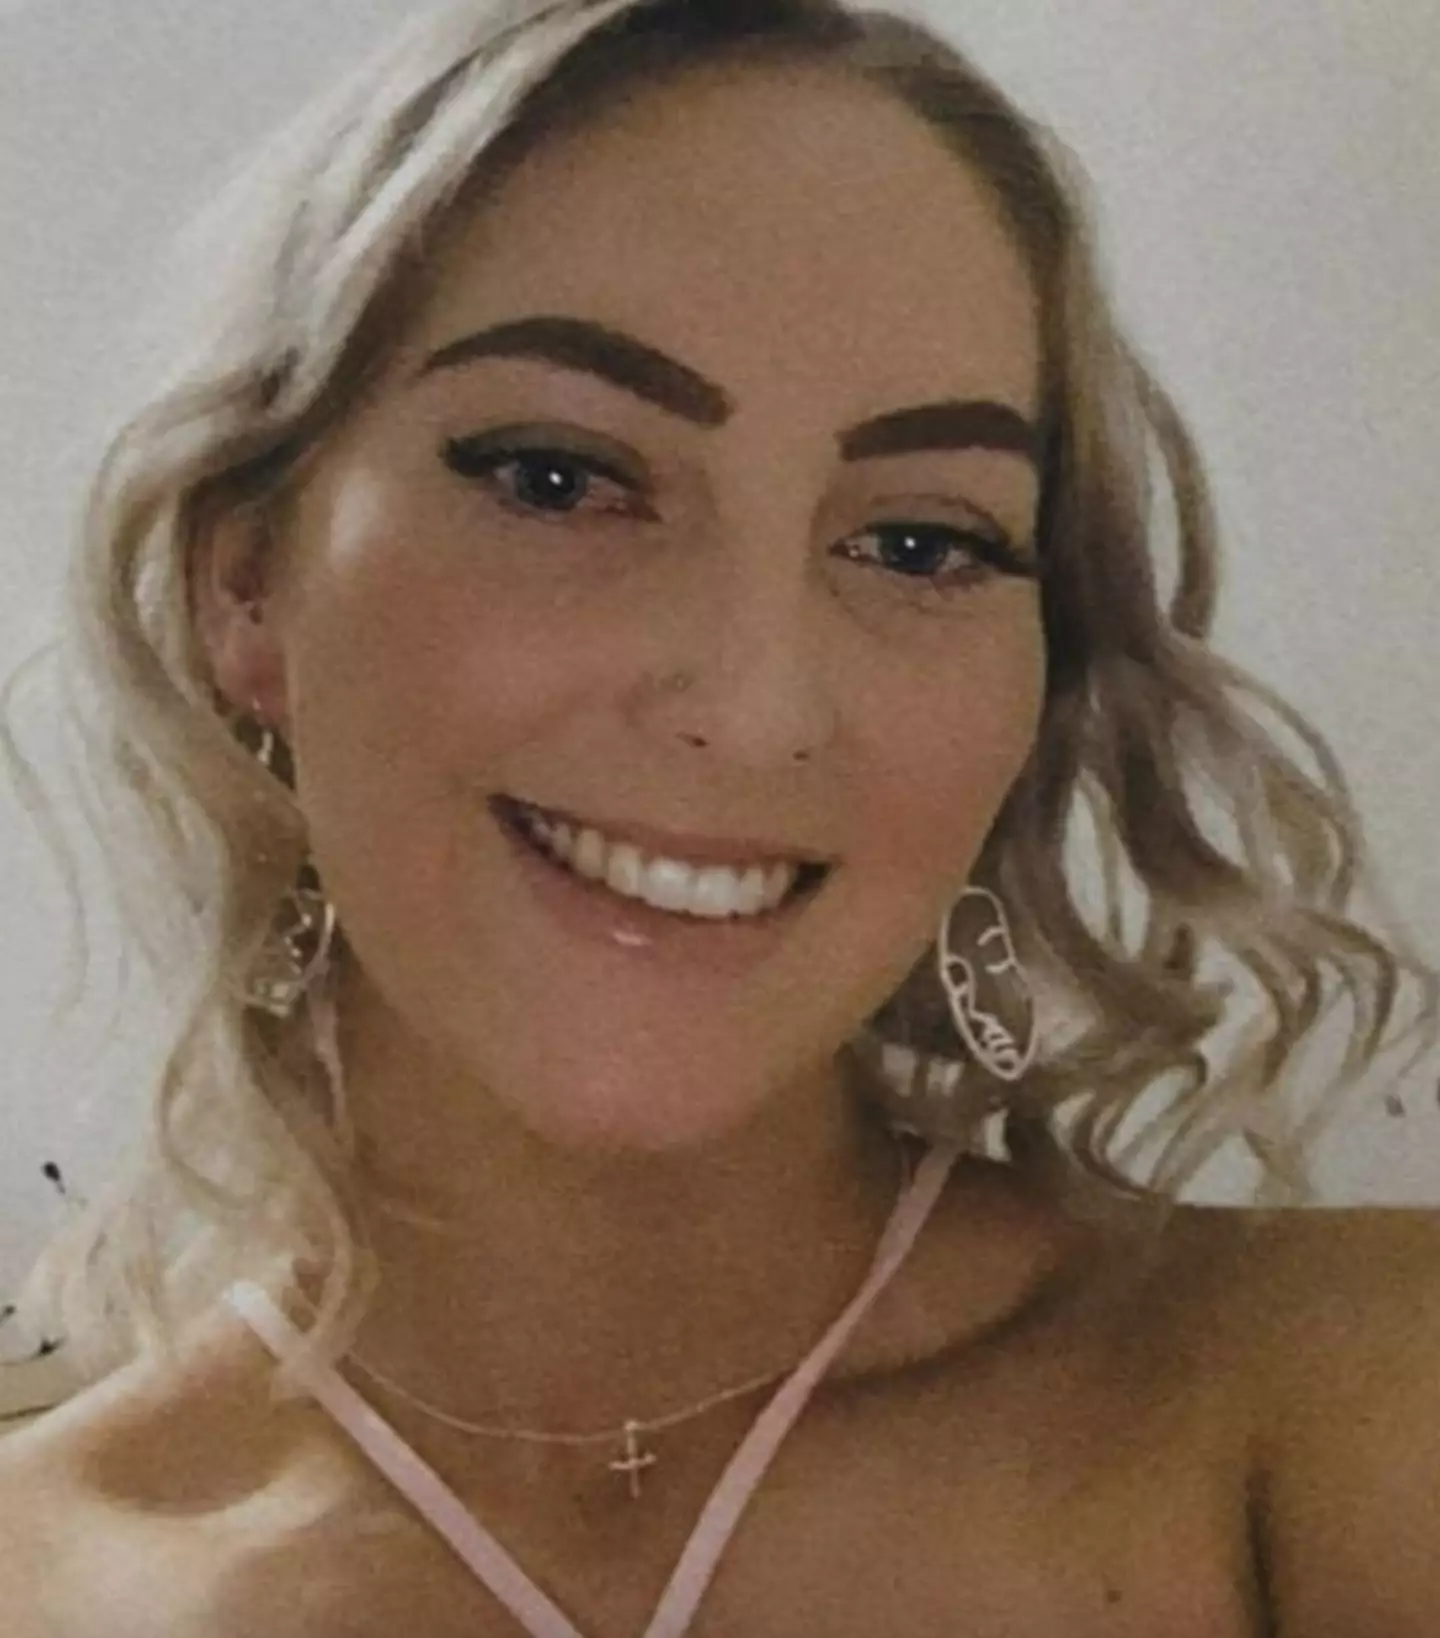 Hannah McGuire's remains were discovered in a burnt out car last Friday (5 April).